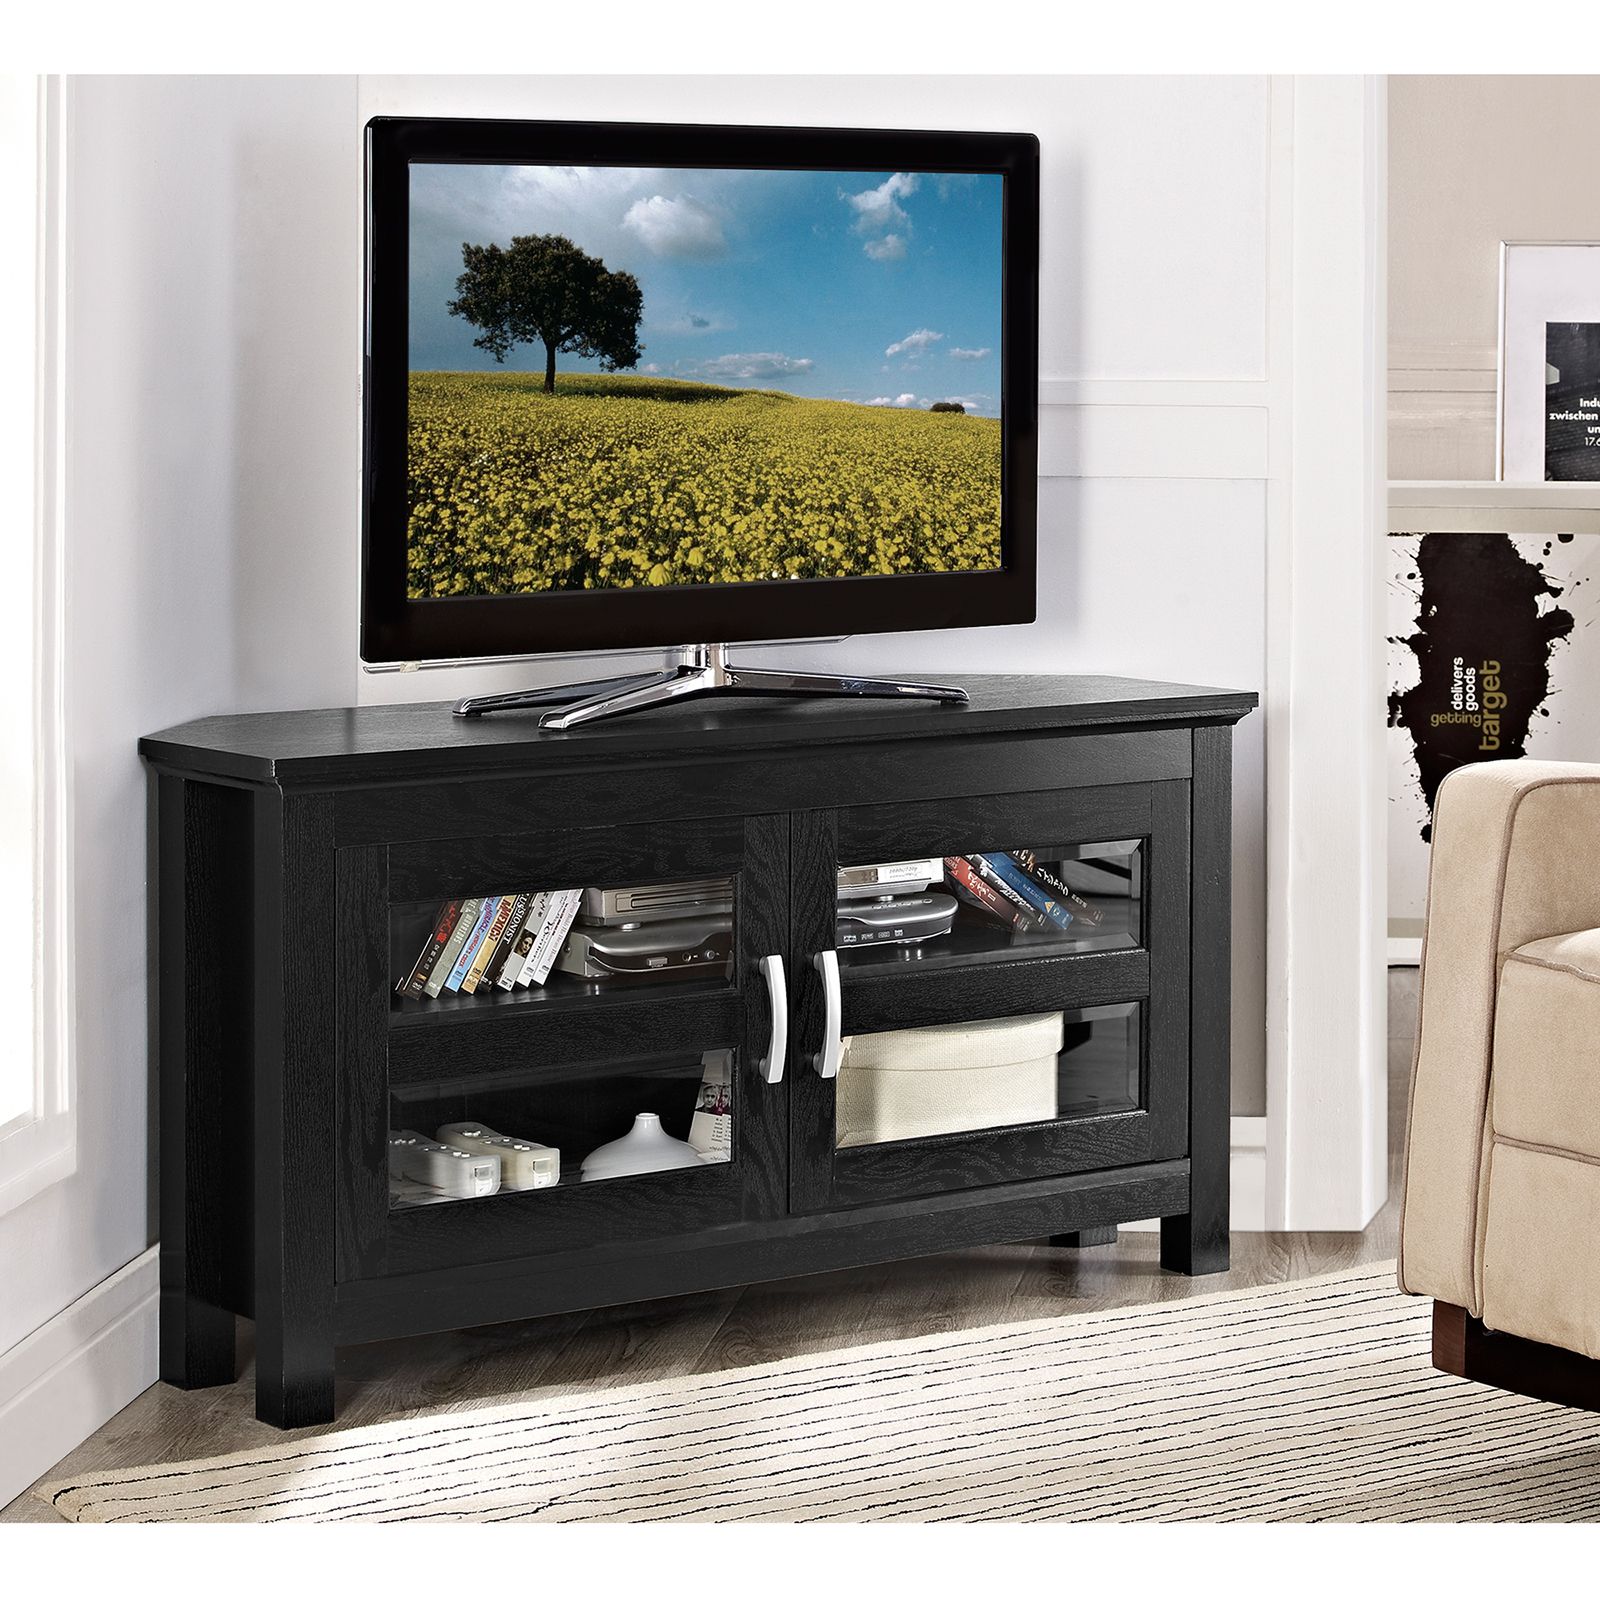 Compton Black Corner Tv Stand – Tv Stands At Hayneedle With Contemporary Corner Tv Stands (View 5 of 15)